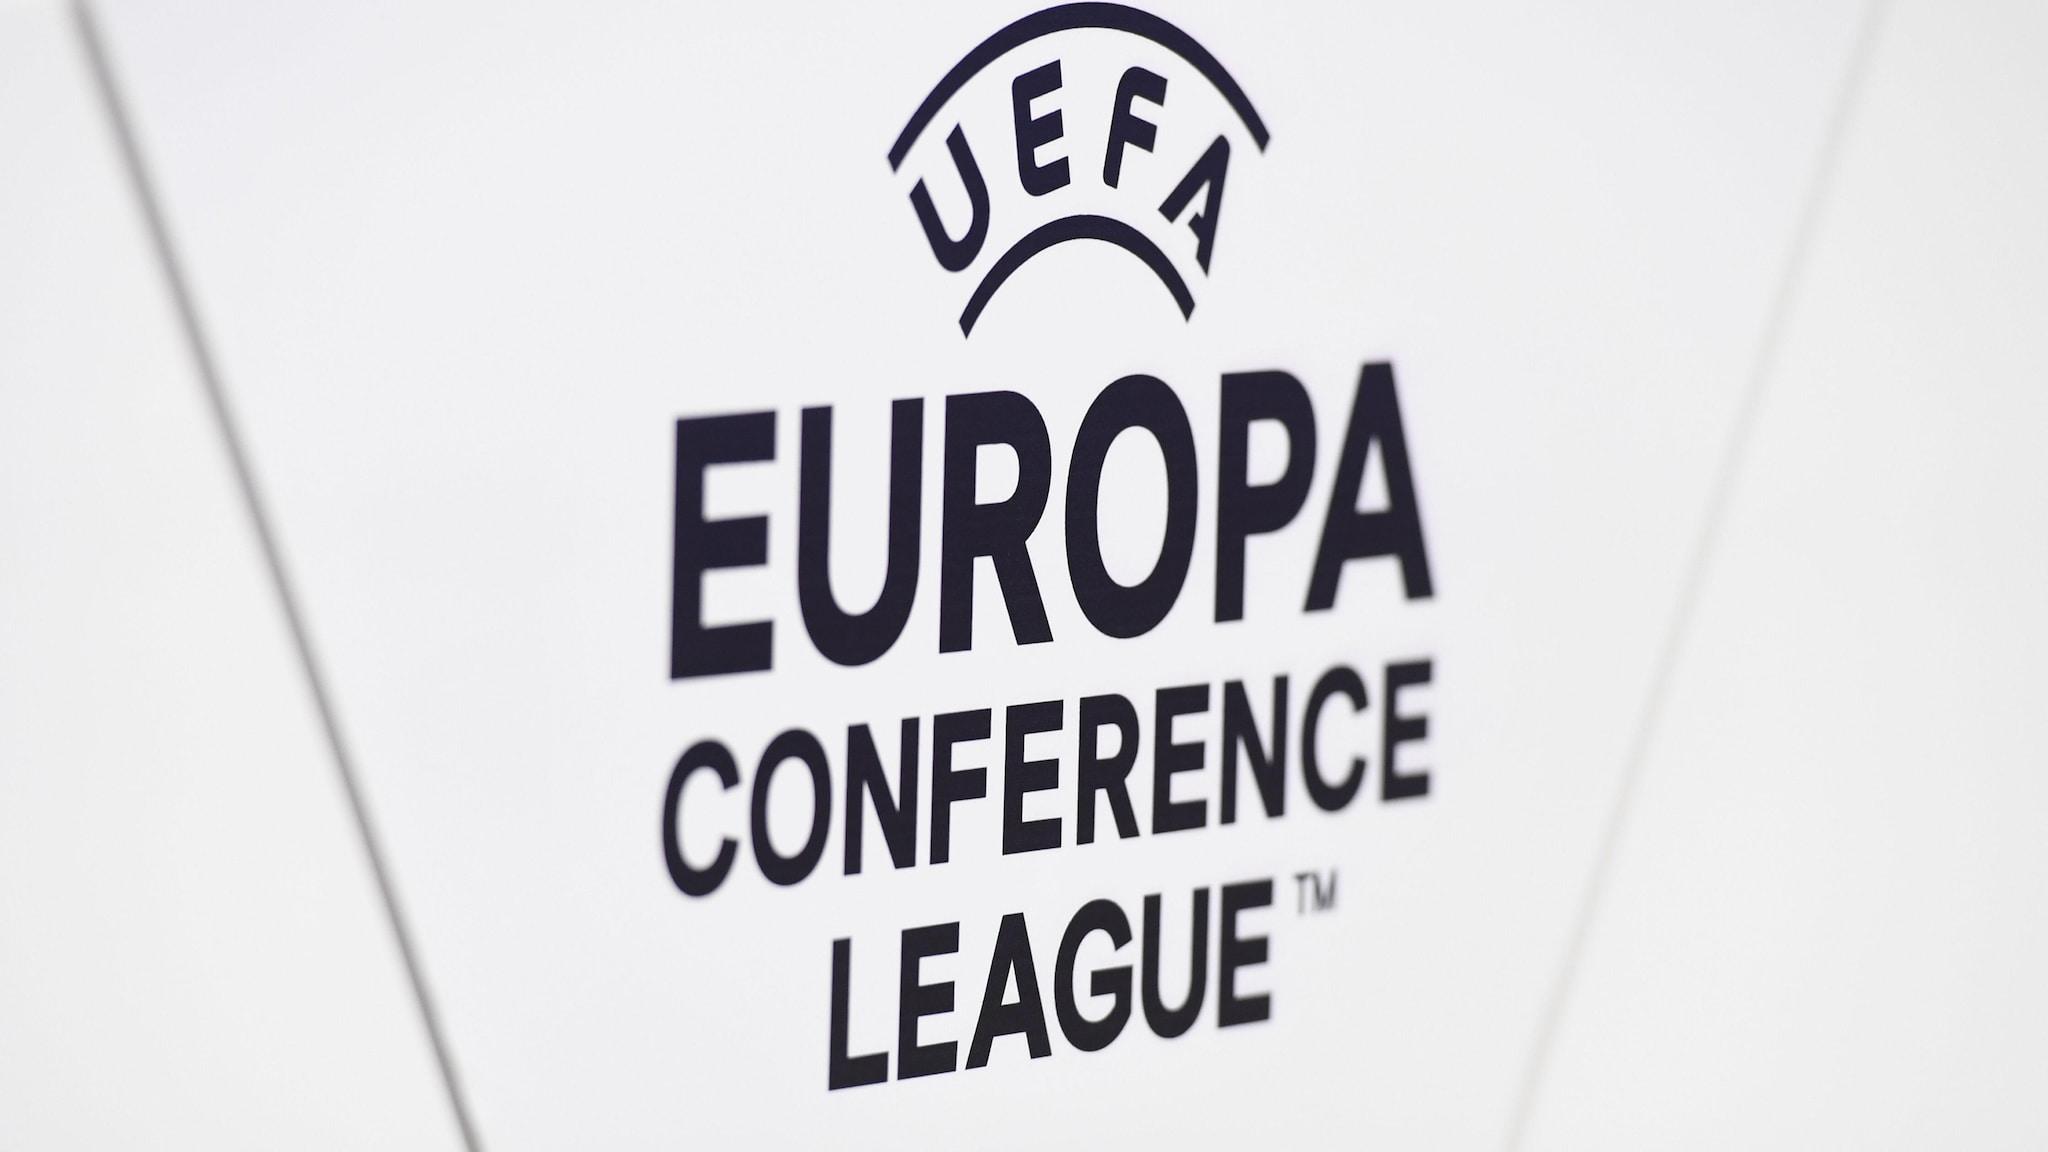 difference between europa league and europa conference league